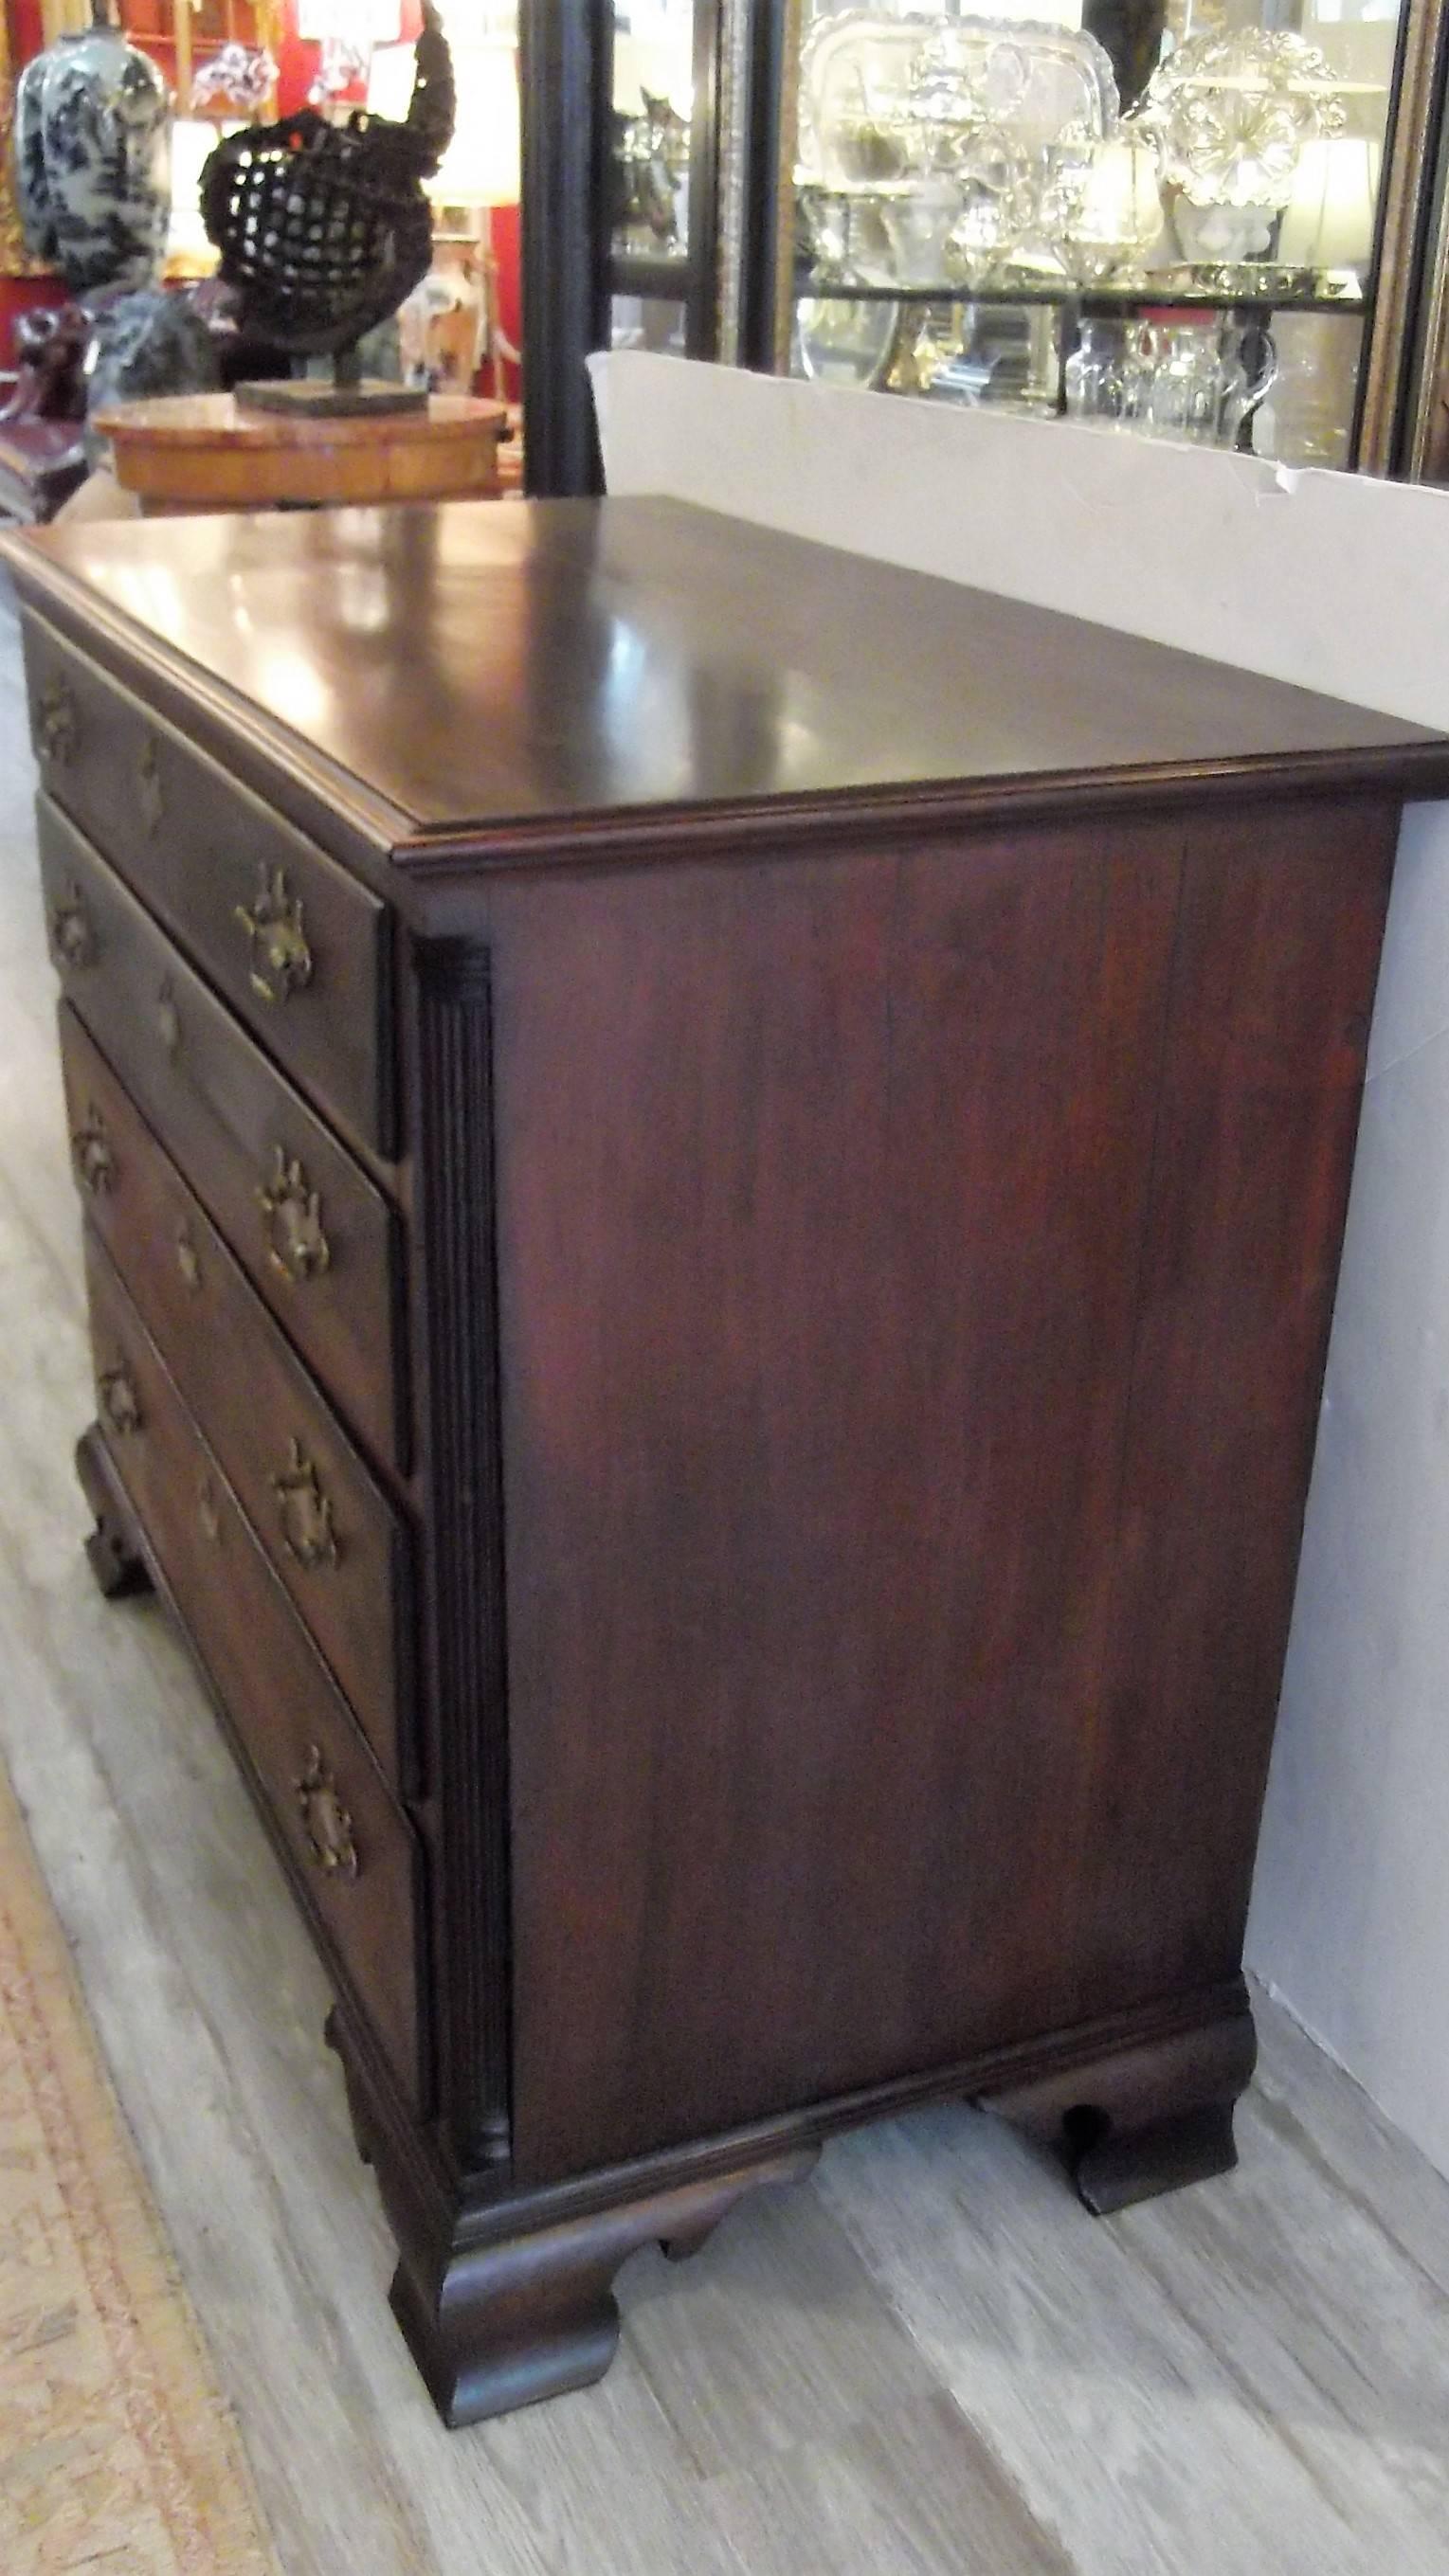 AMERICAN chippendale walnut chest of drawers with bracket feet. An outstanding specimen of Early Pennsylvania craftsmanship, this chest of drawers is one that retains incredible character and history etched in it's worn and abraded surfaces. It's